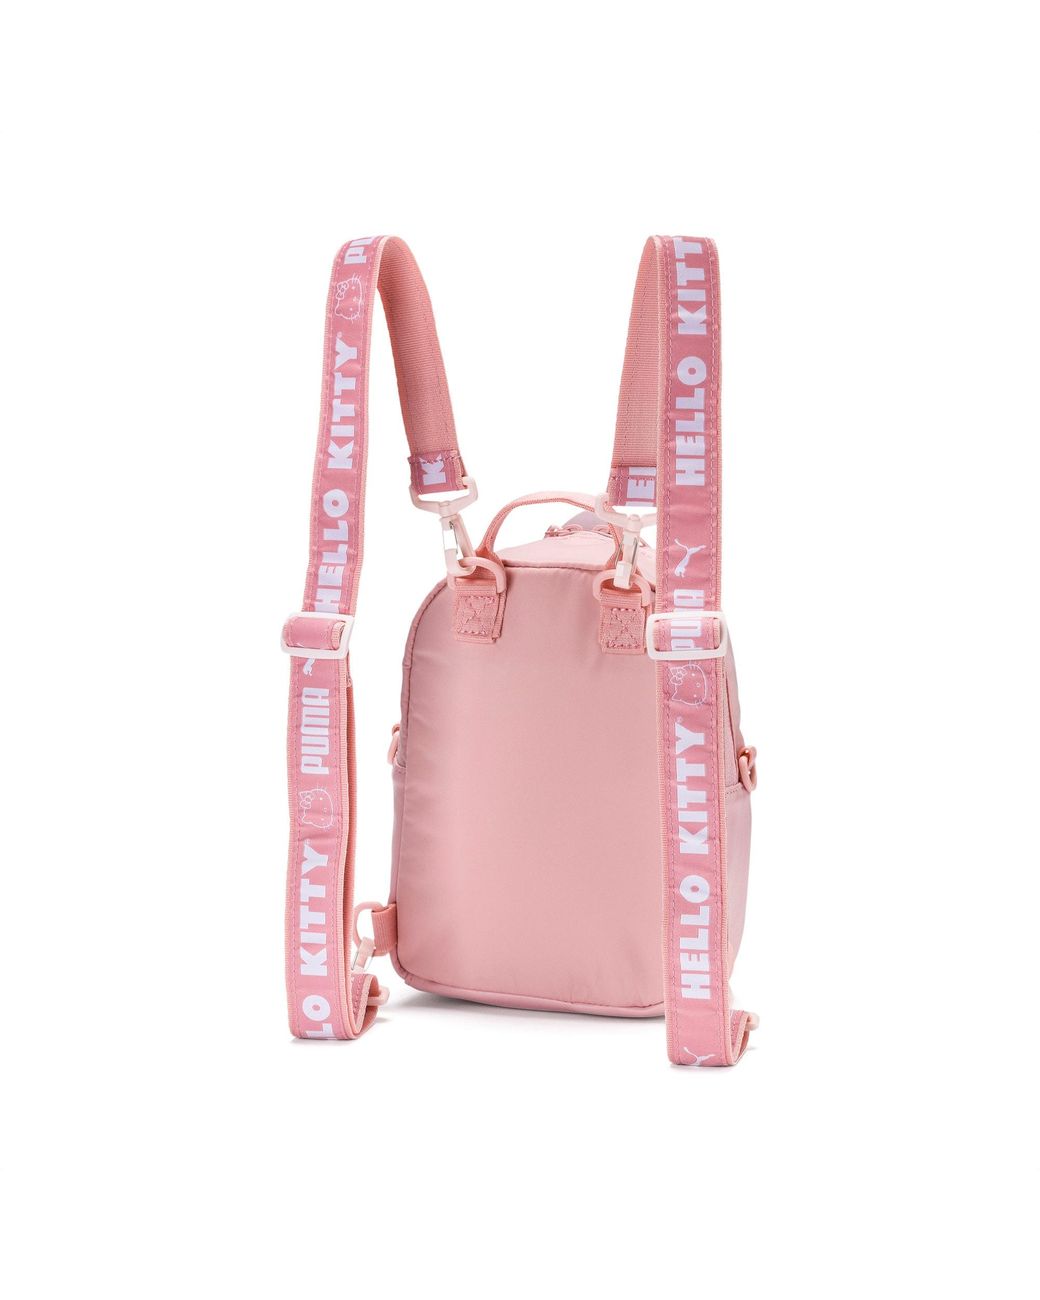 PUMA Rubber X Hello Kitty Mini Backpack in Silver Pink (Pink) | Lyst